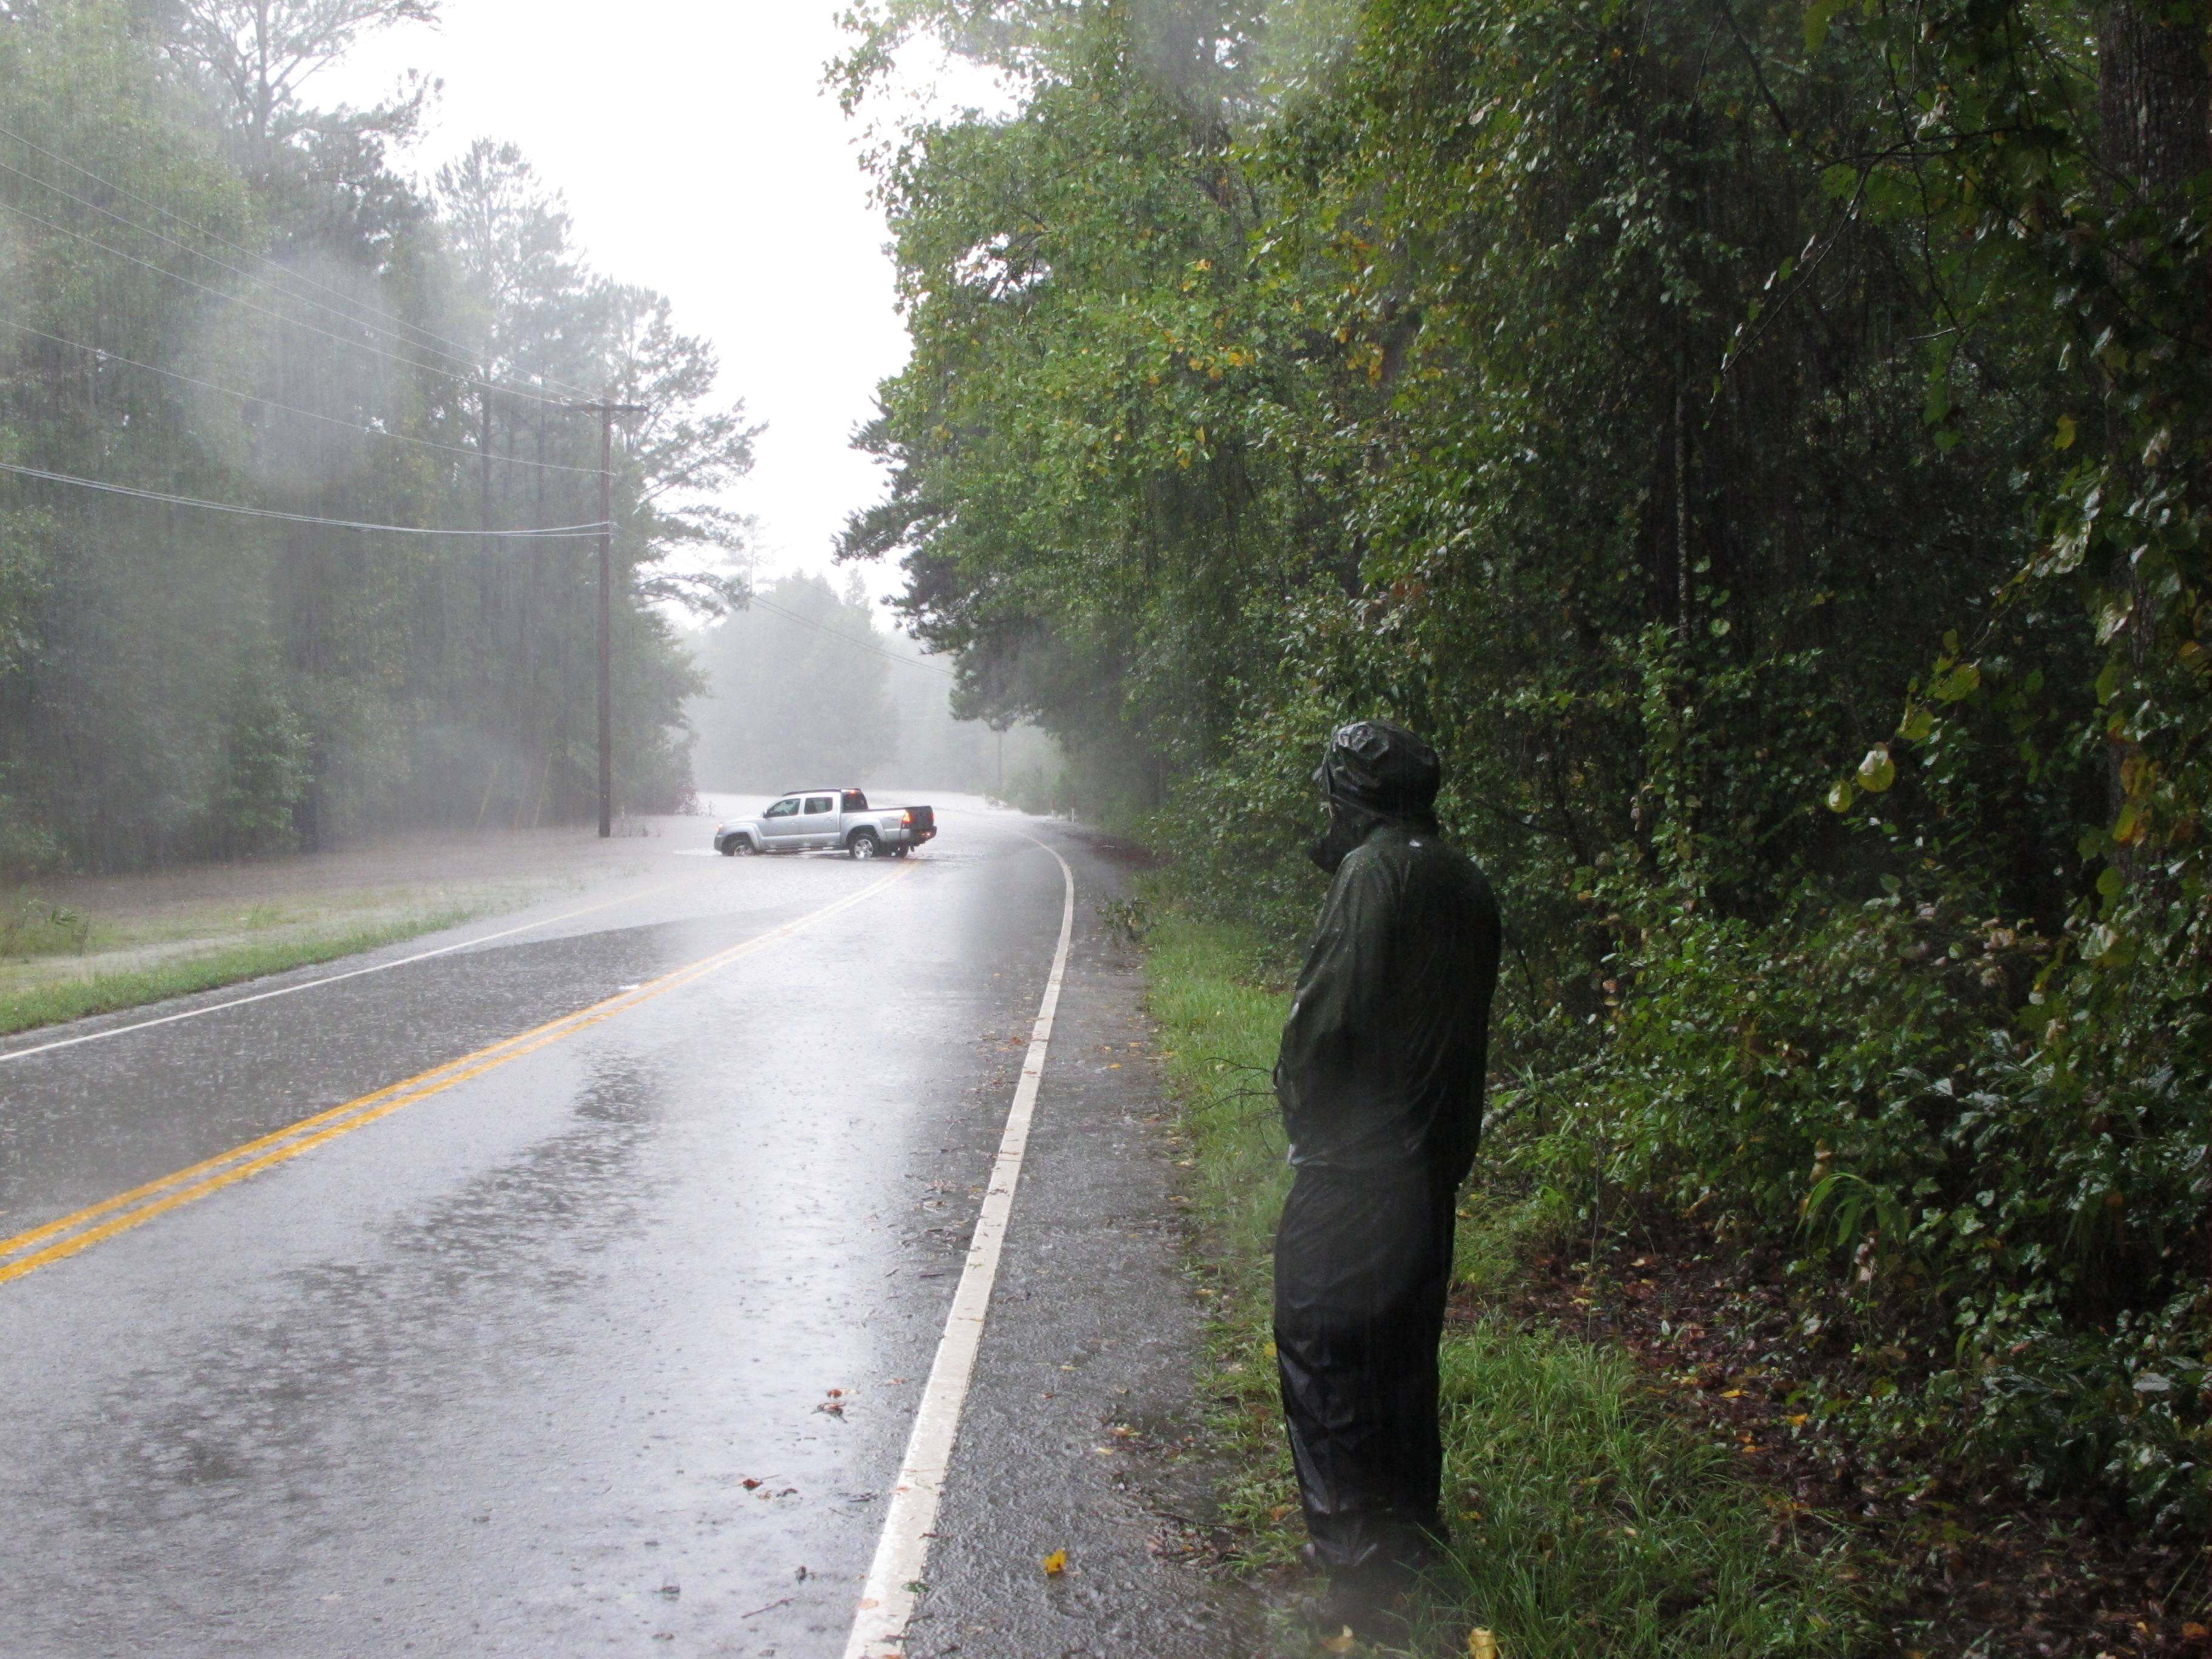 Fred Grooms watches as a car turns around in flood waters on Hardscrabble Road on Sunday, Oct. 4, 2015, in Columbia, S.C.